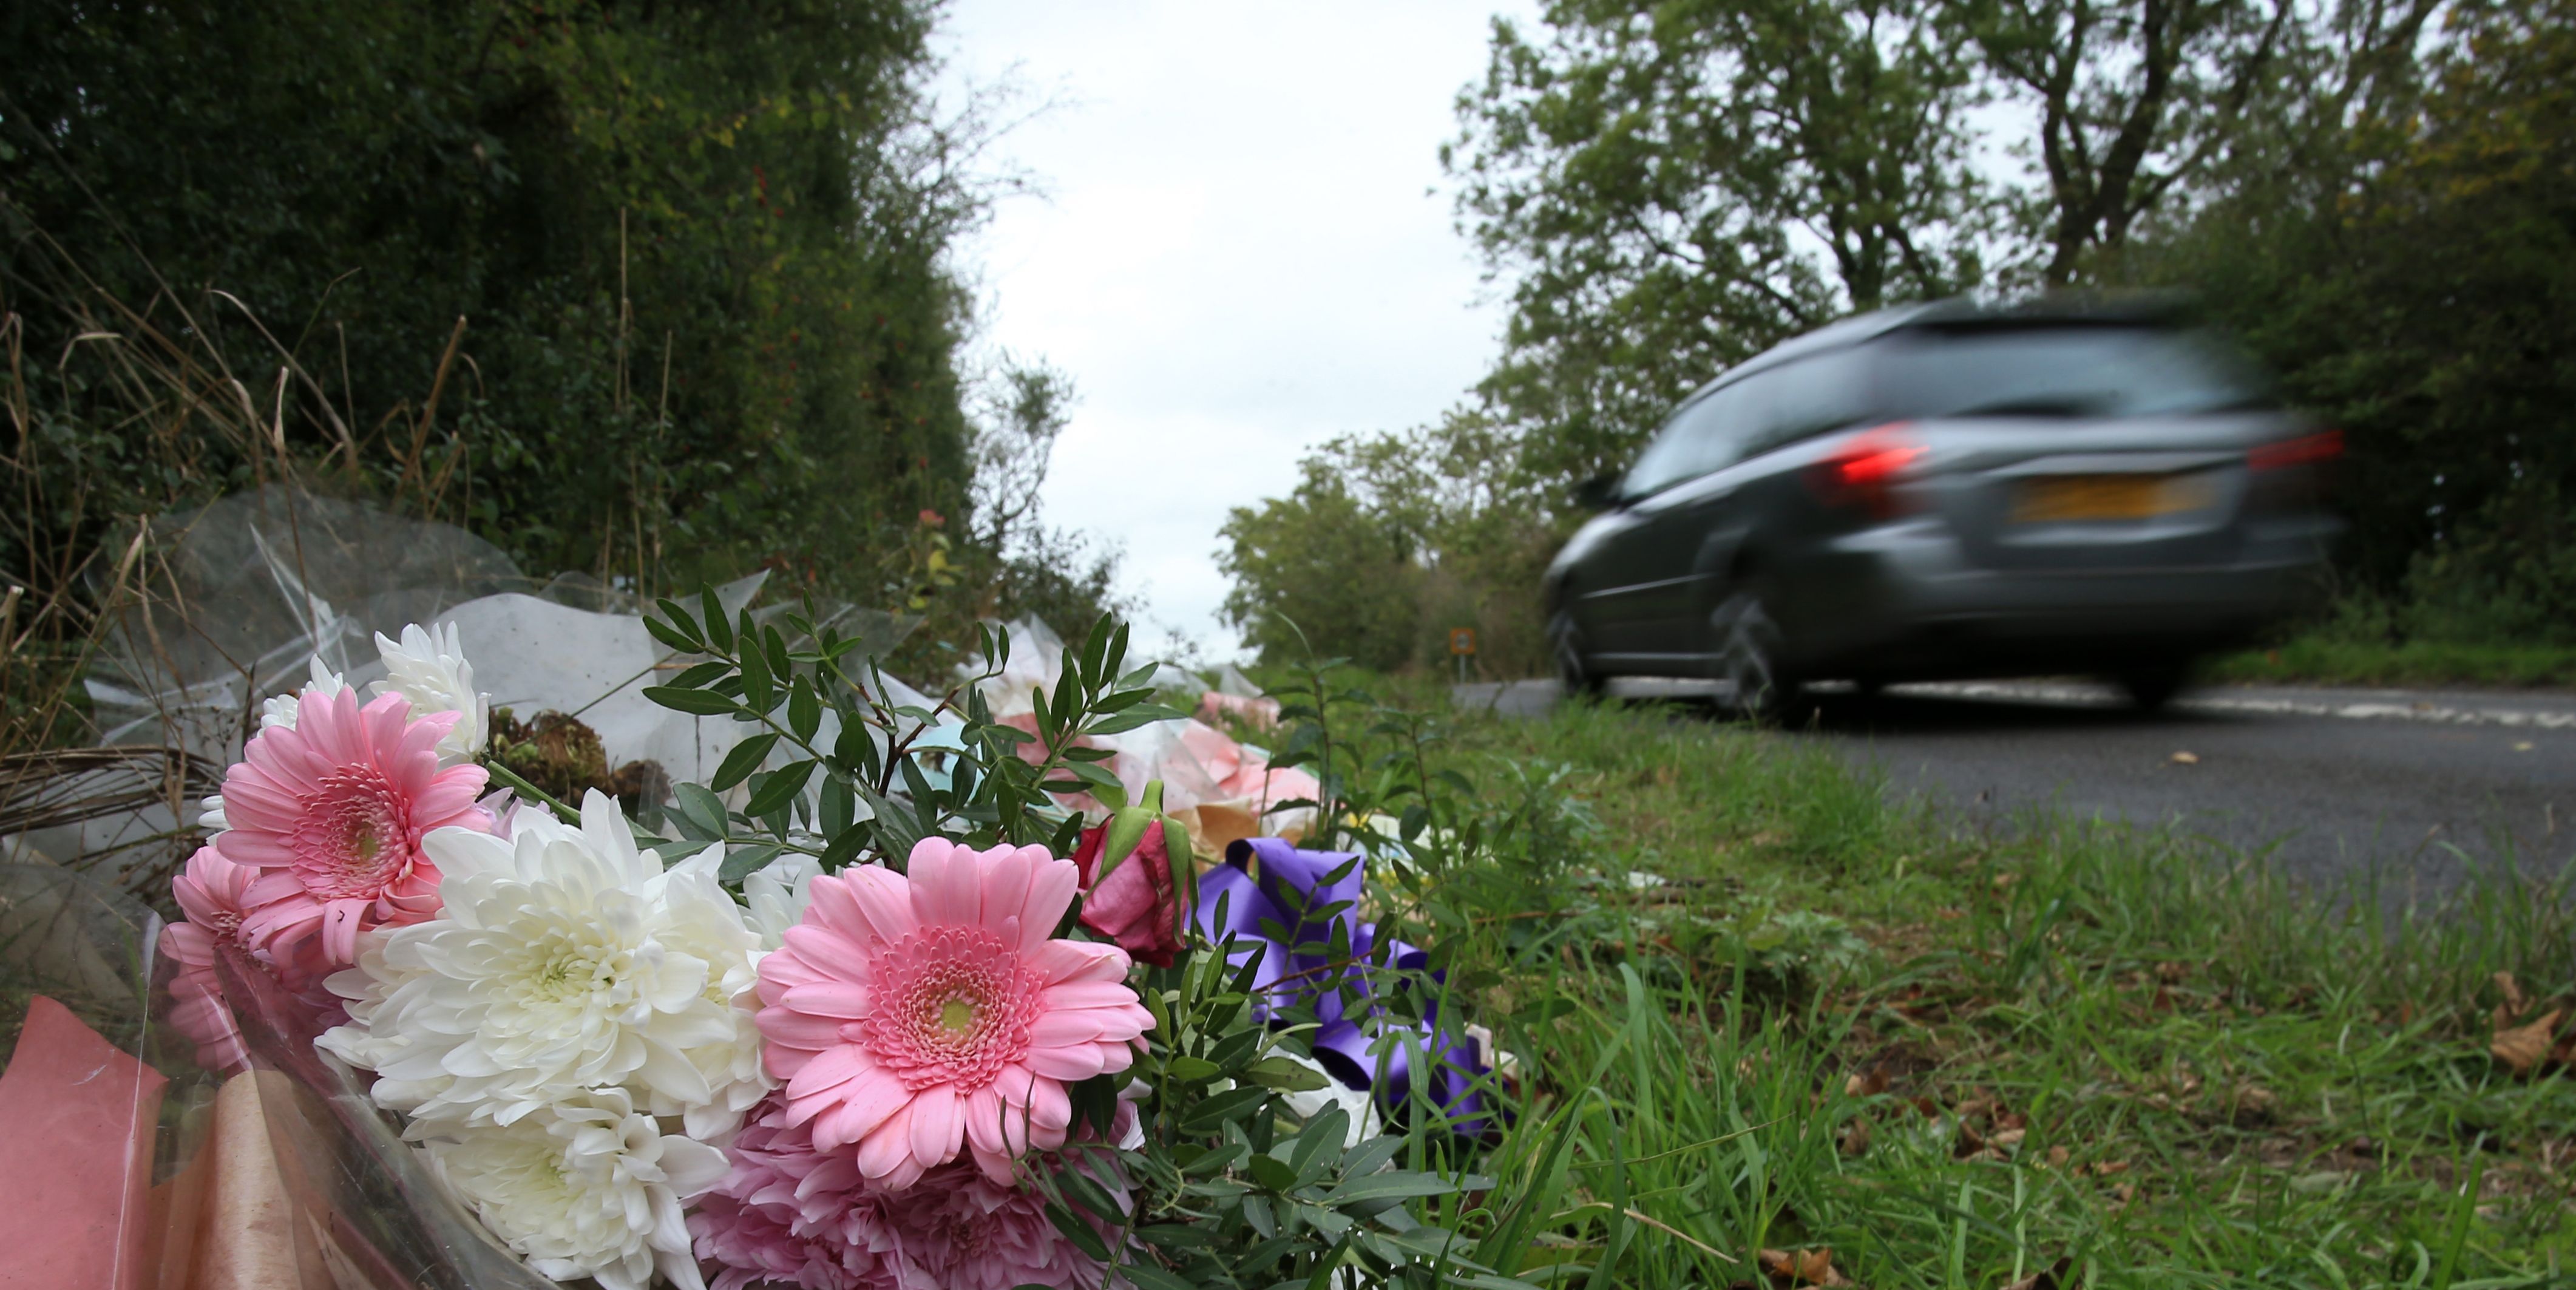 Opinion: Roadside Safety Requires Immediate Action